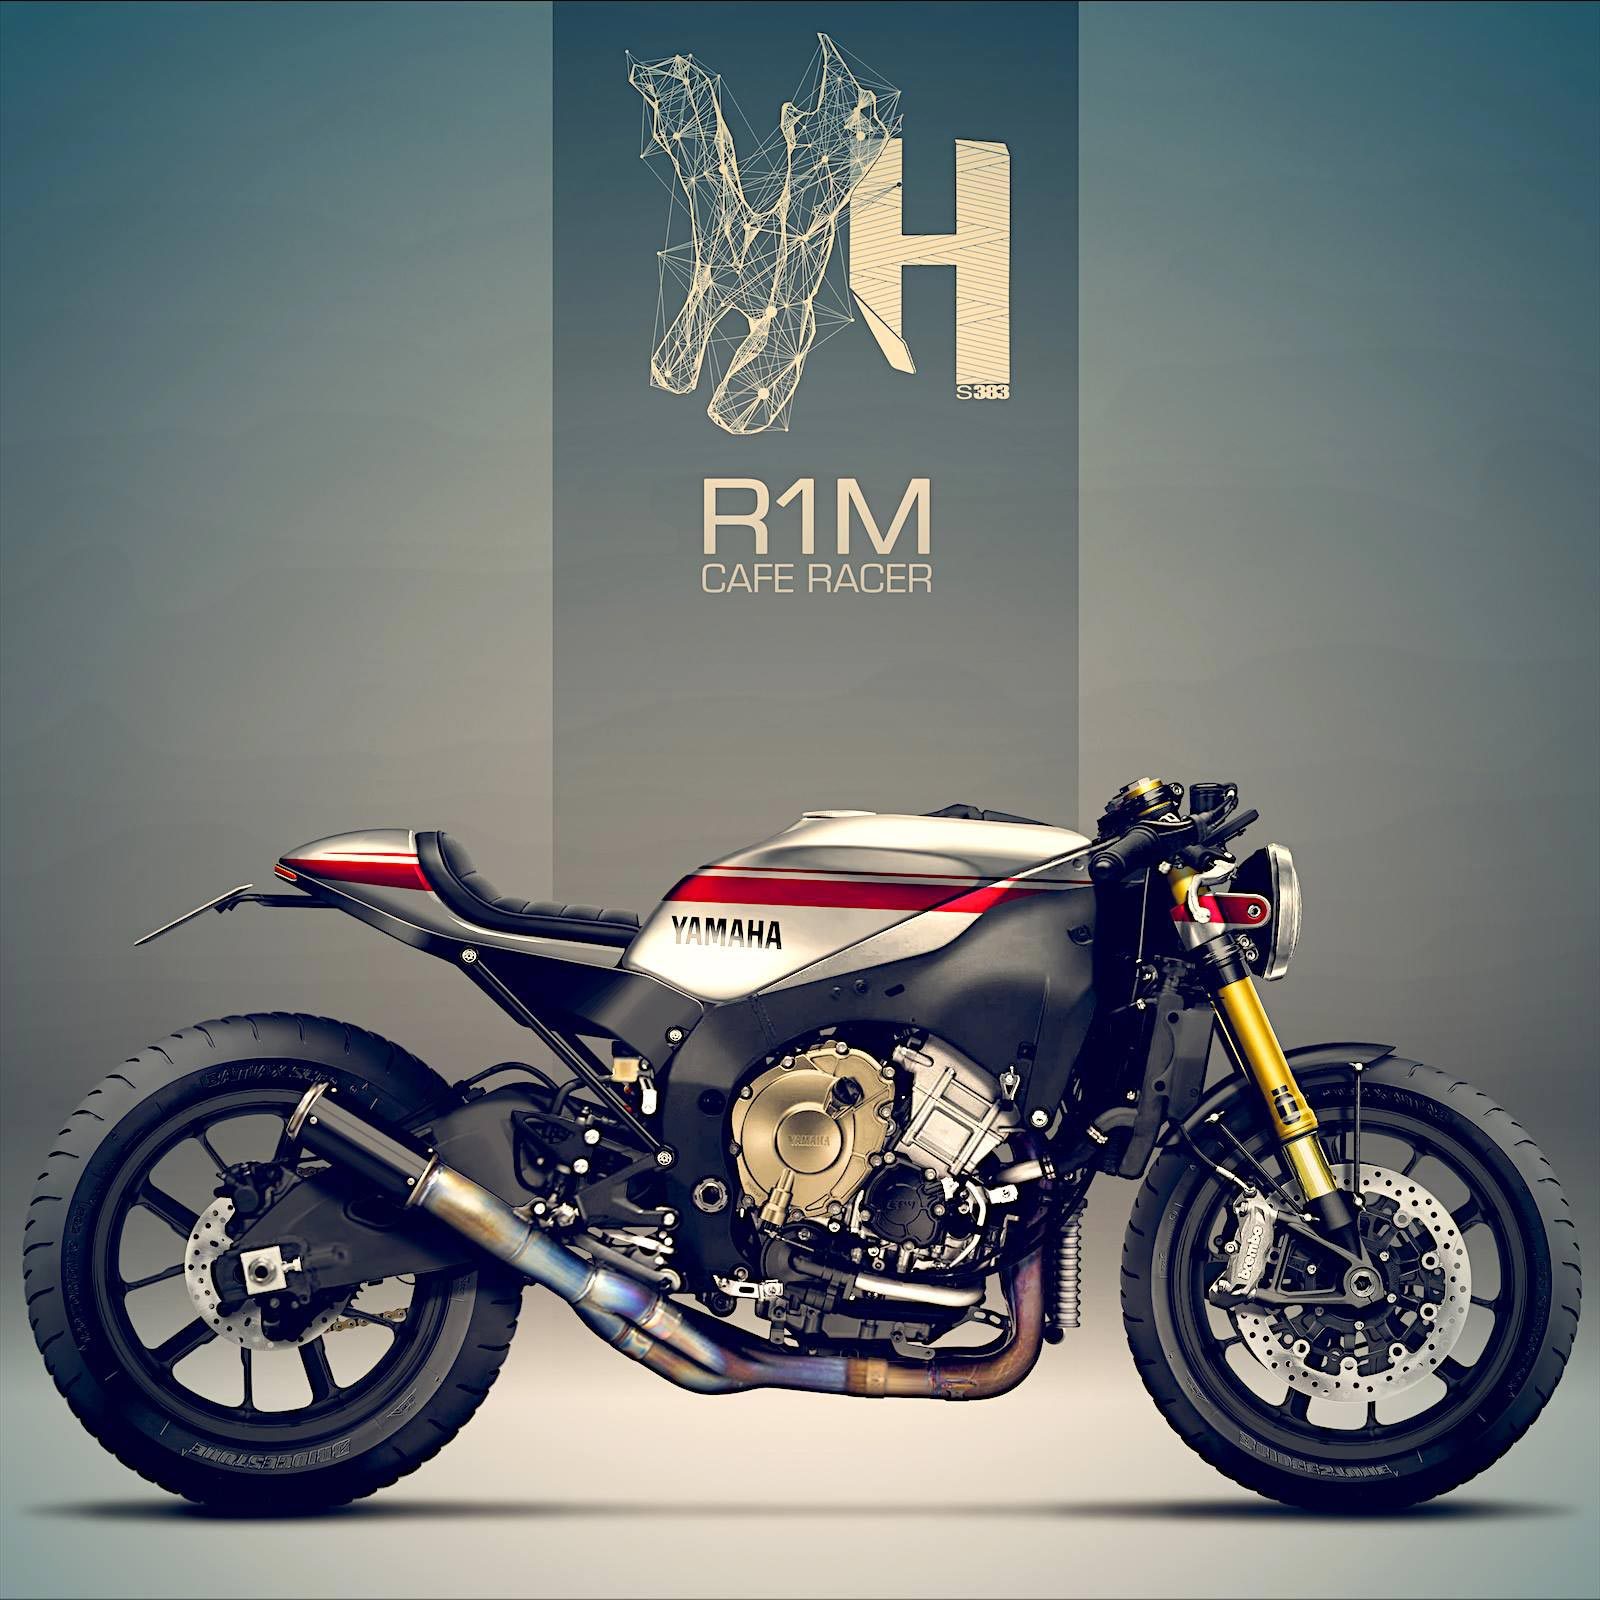 Yamaha R1M Café Racer by Holographic Hammer